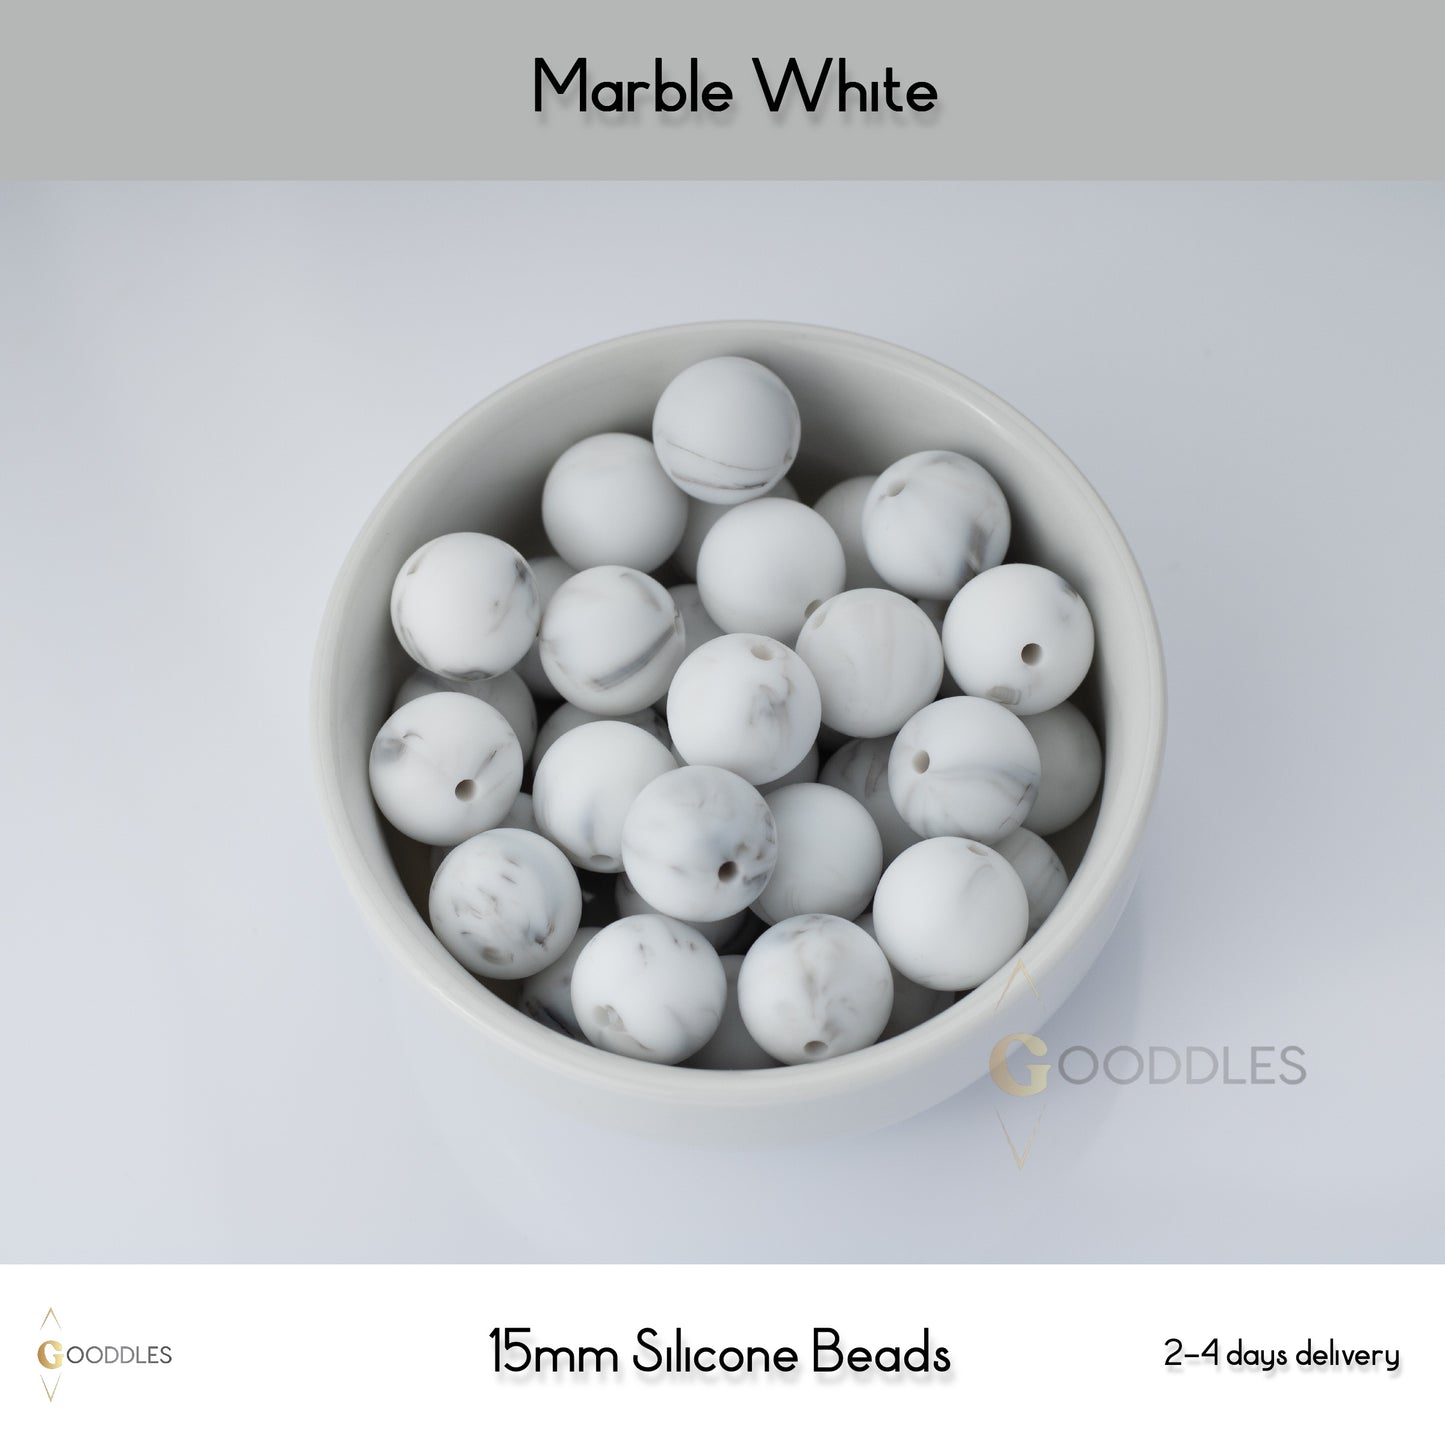 5pcs, Marble White Silicone Beads Round Silicone Beads